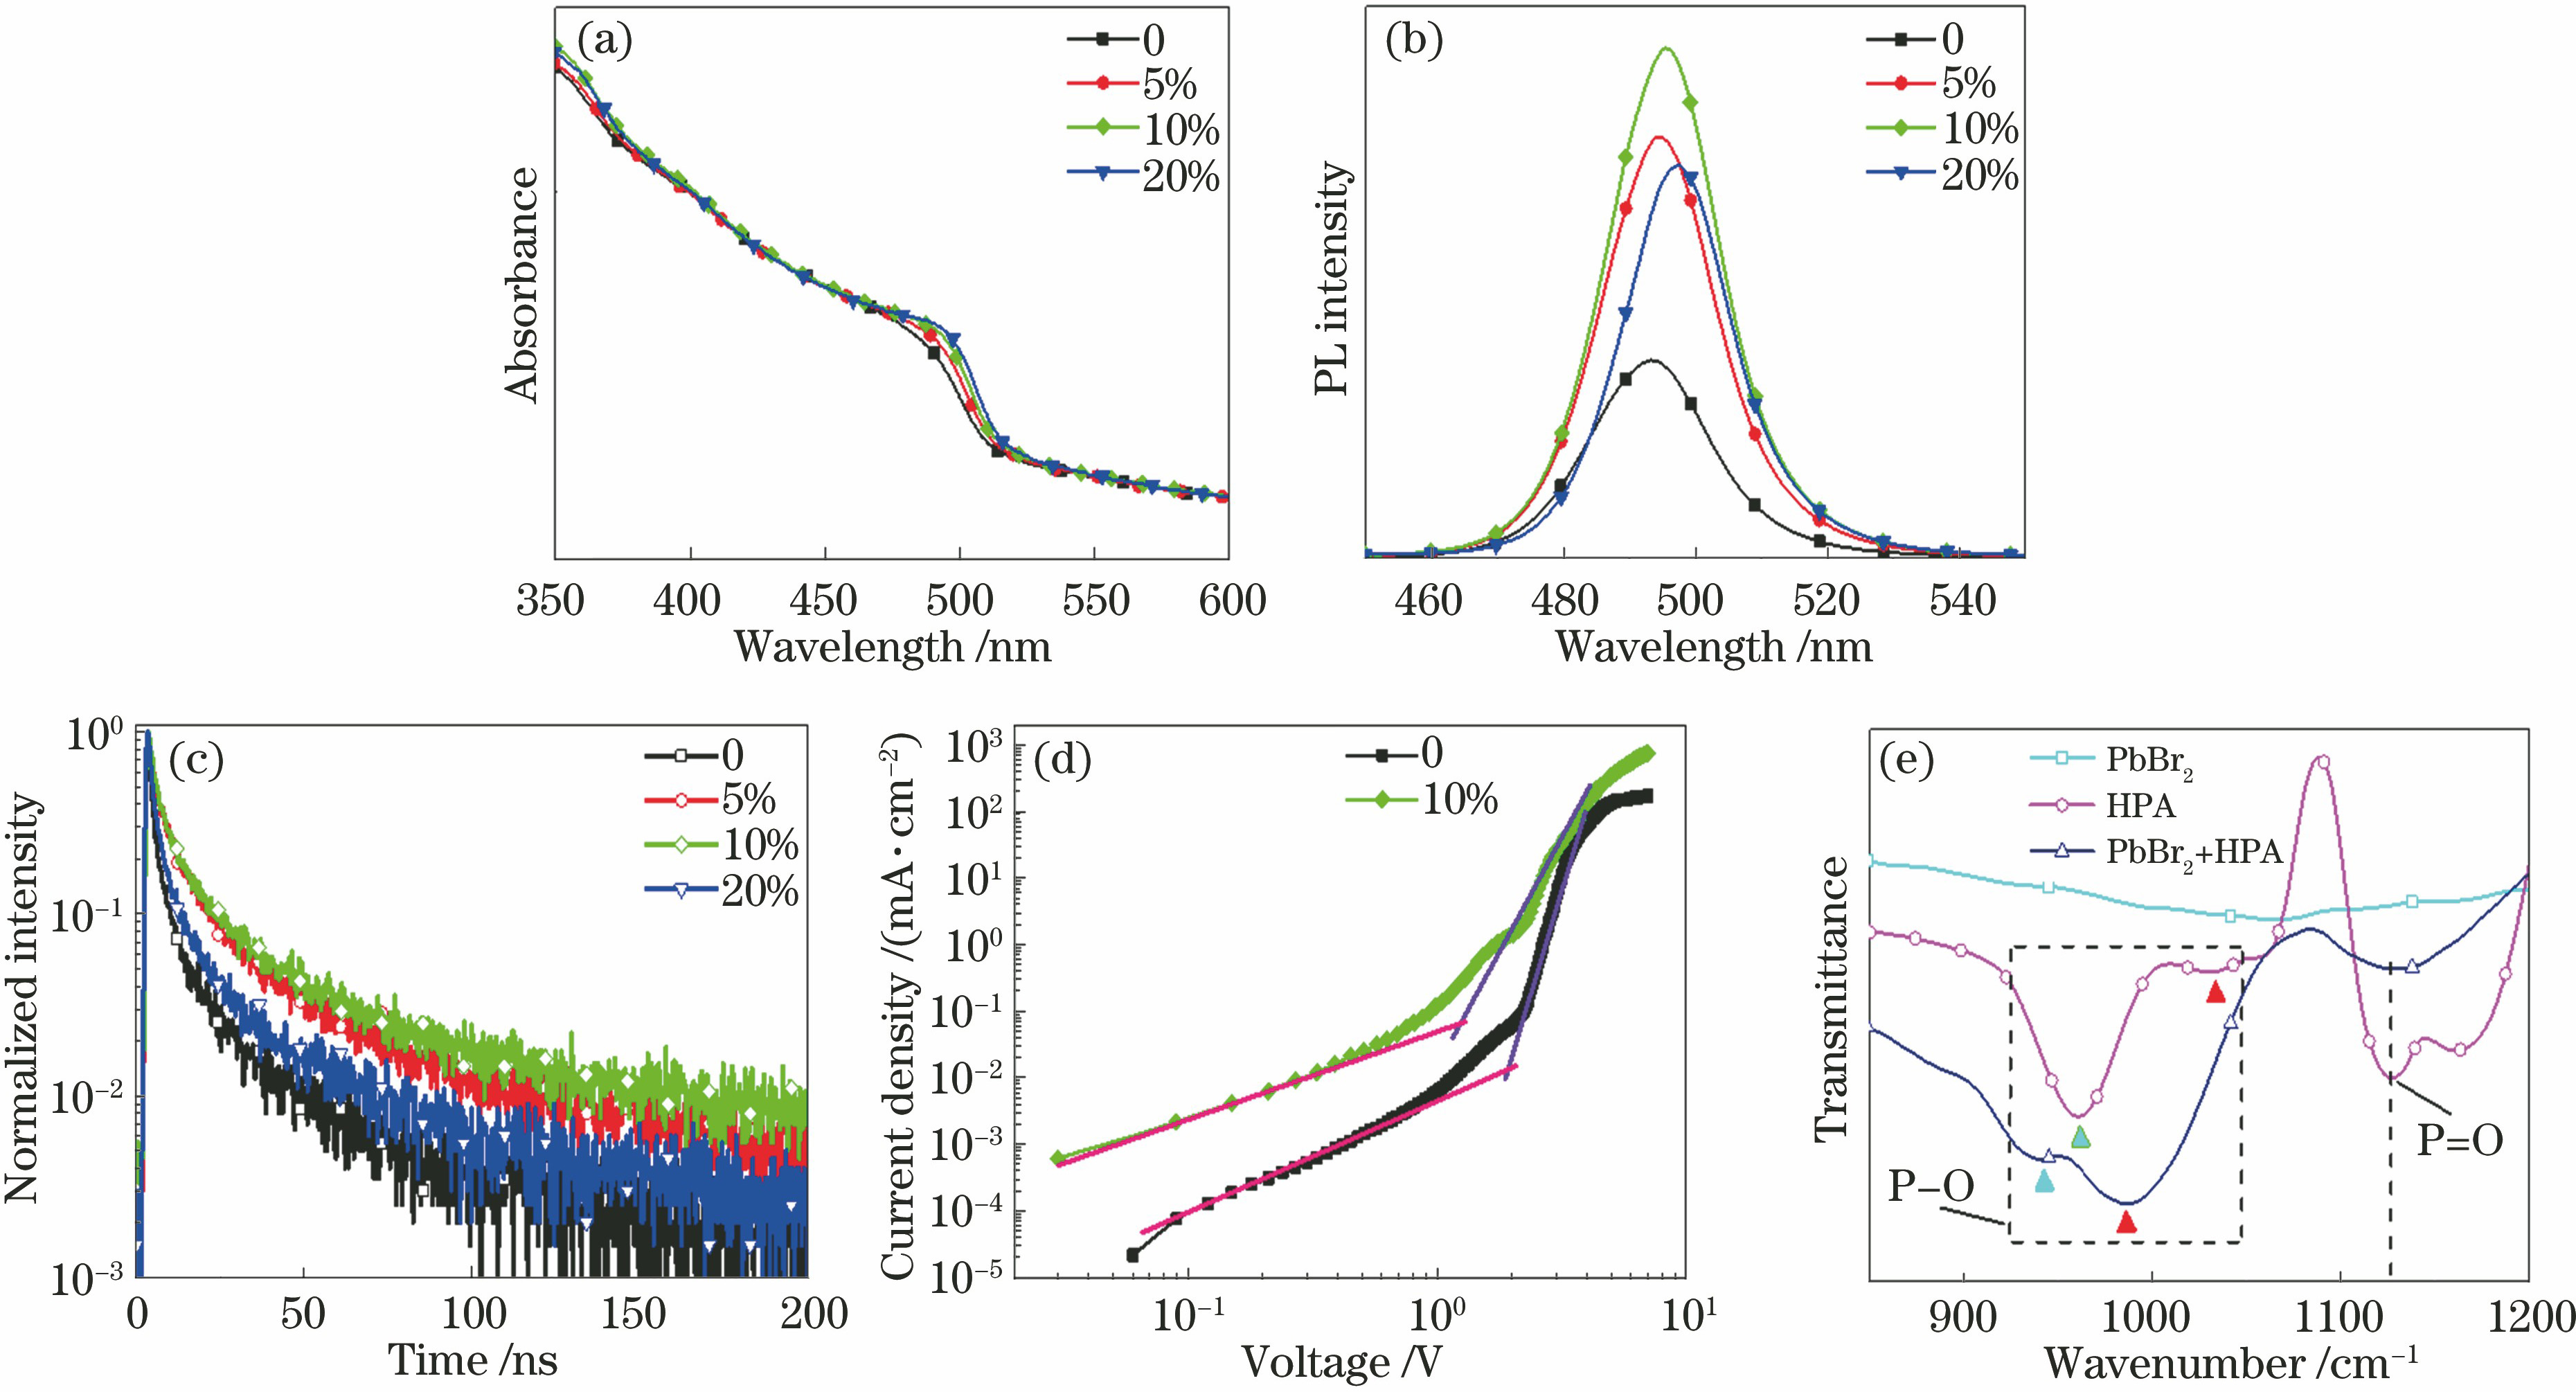 Characteristics of perovskite films with different doping concentrations of HPA. (a) Absorption spectra; (b) photoluminescence spectra; (c) TRPL characteristics; (d) current-voltage characteristics of hole-dominated devices; (e) Fourier transform infrared spectra of PbBr2, HPA, and PbBr2+HPA samples